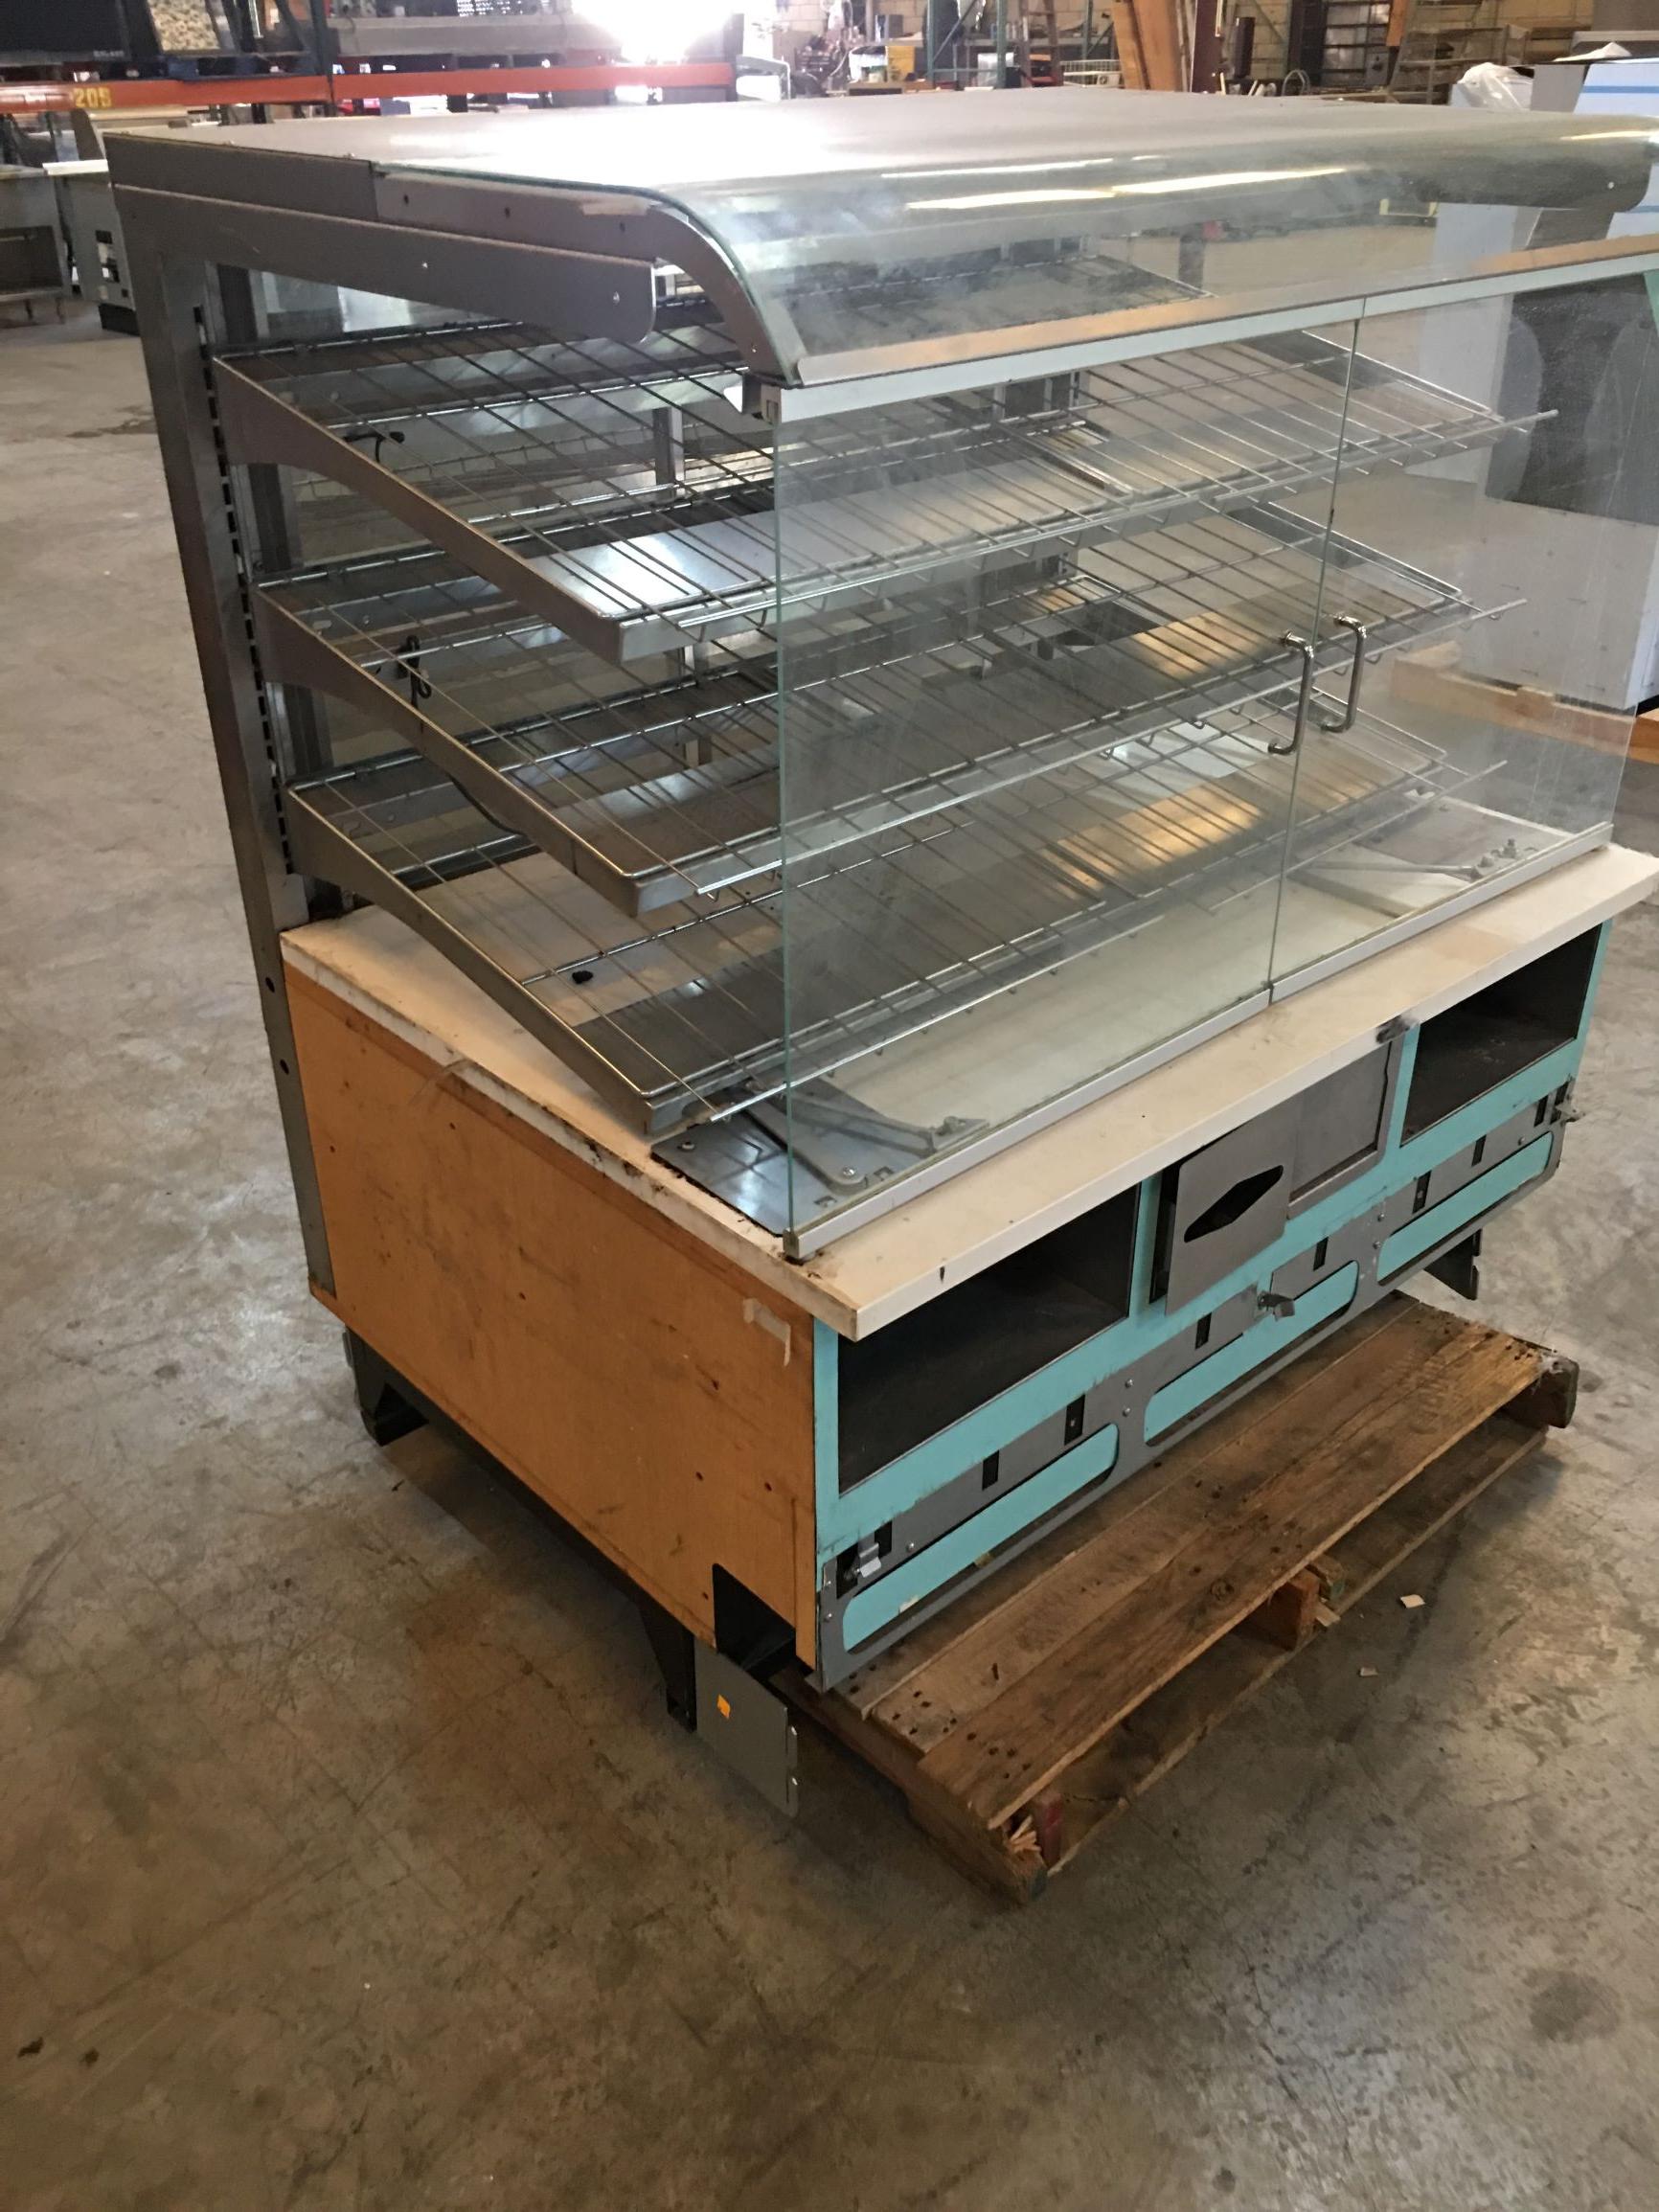 Structural Concepts DryPastry/ Donut Display Case